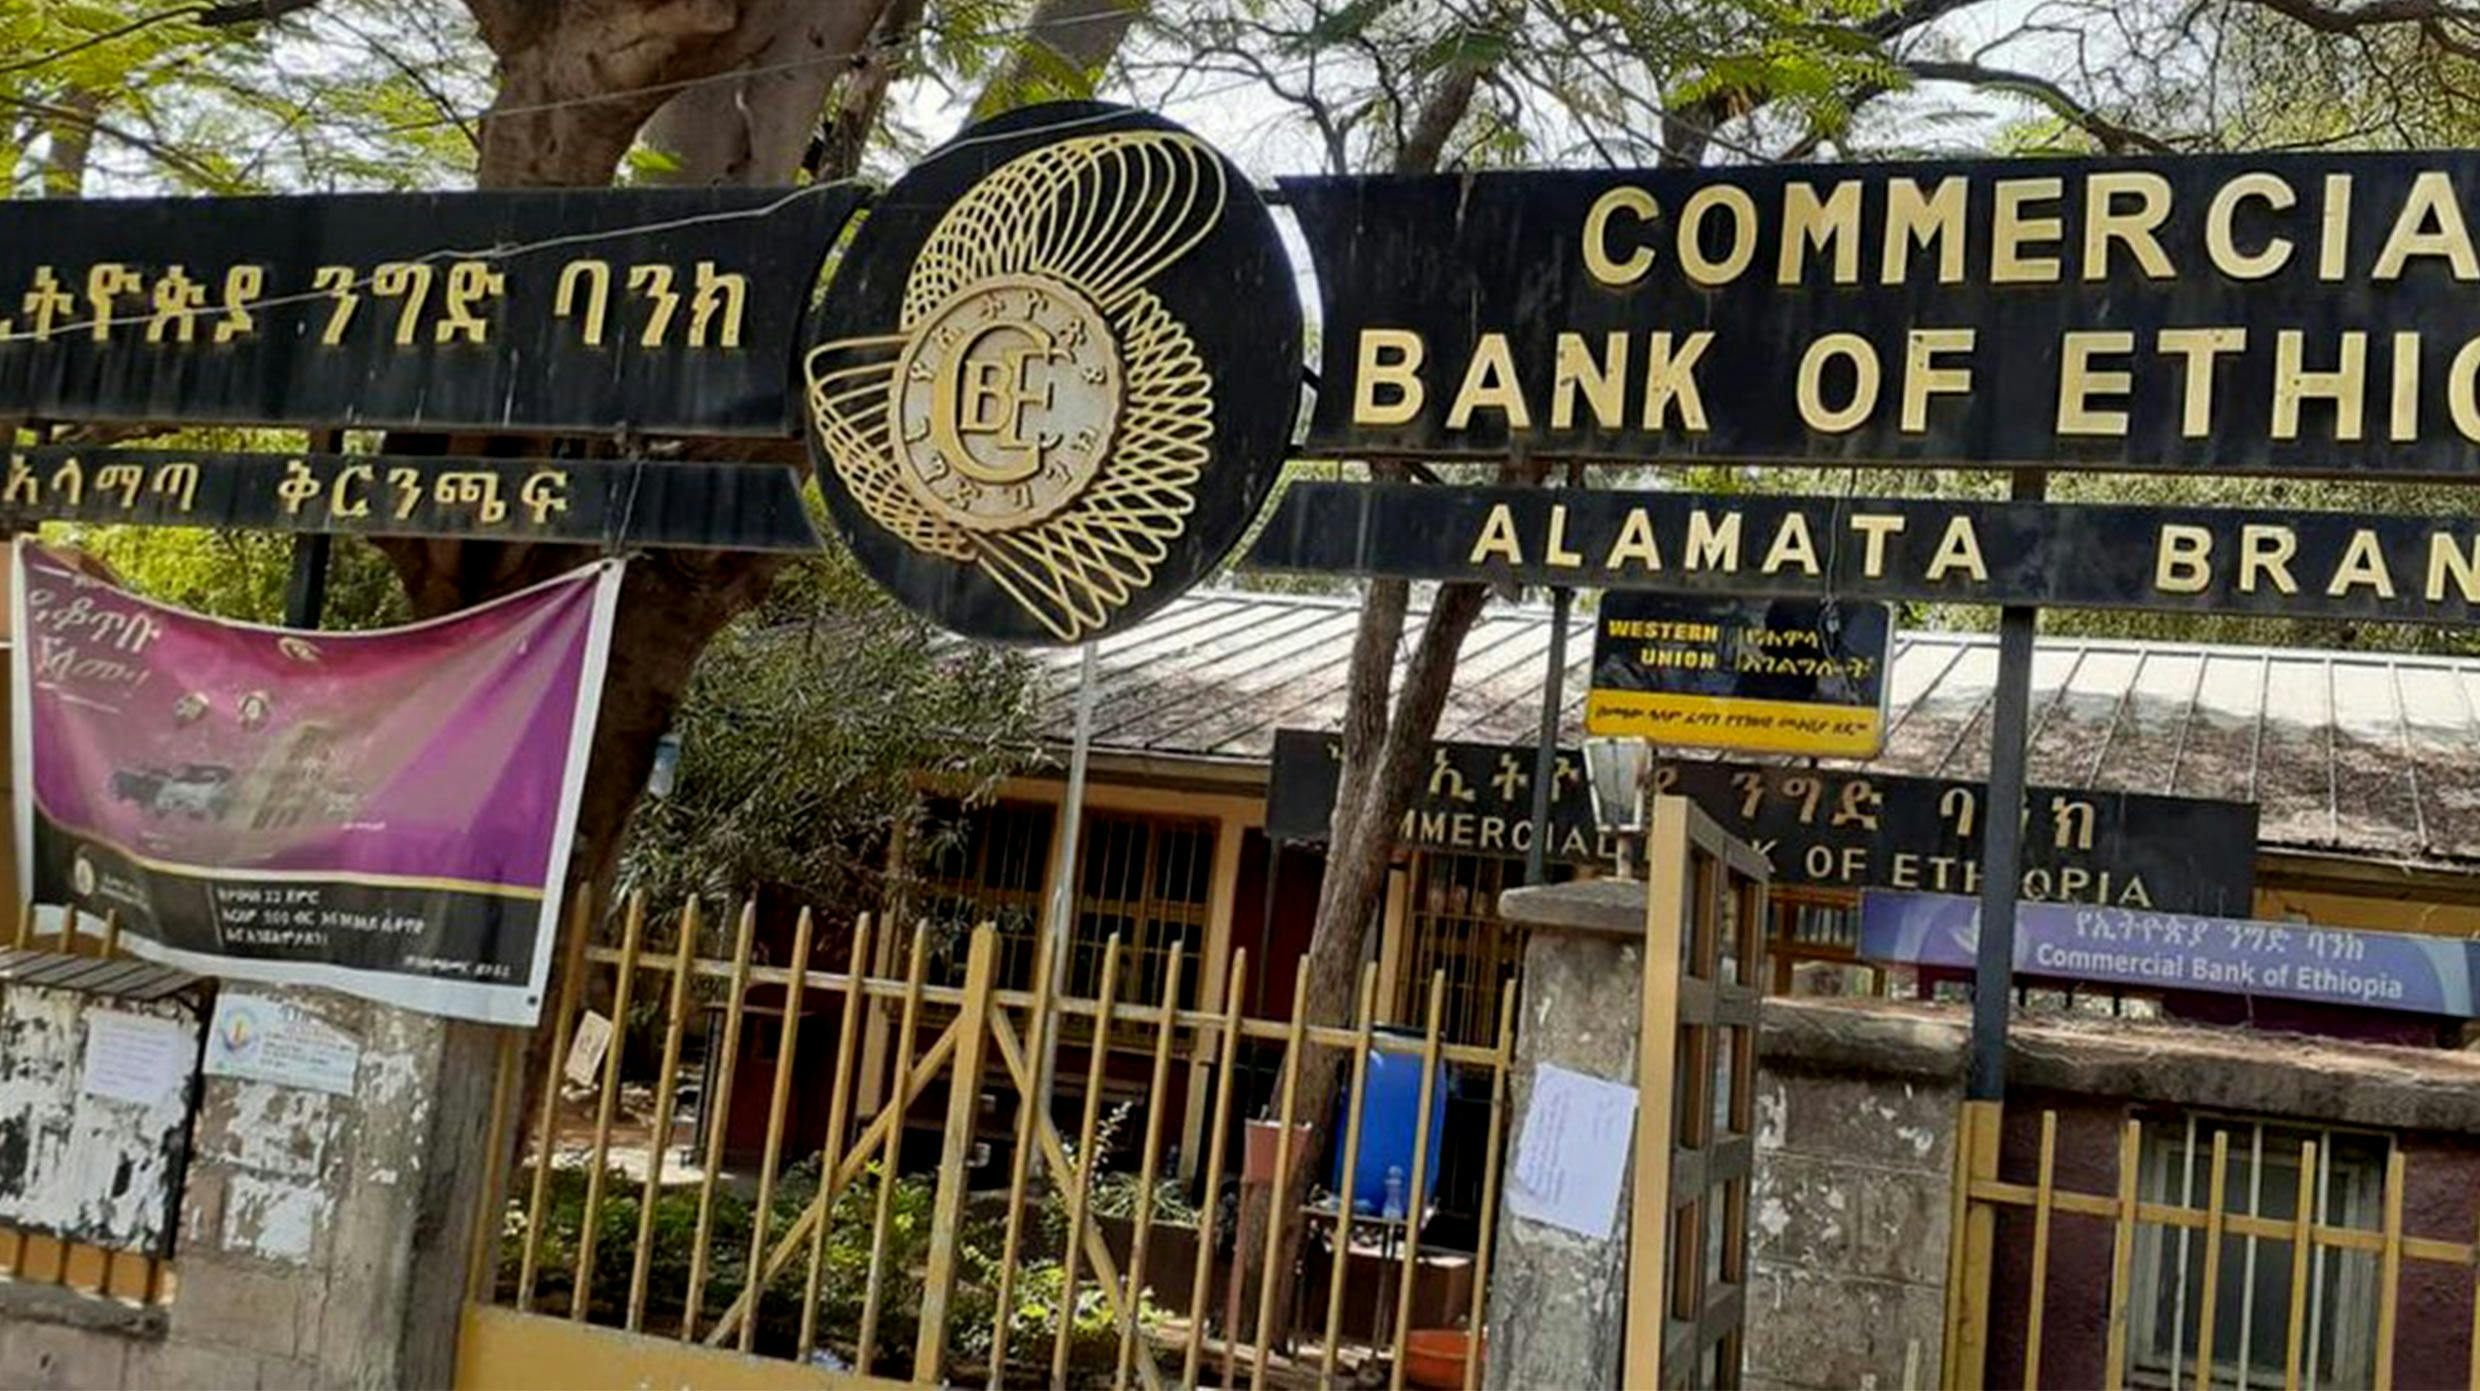 Banking services resuming in Tigray, but only serving money transfer